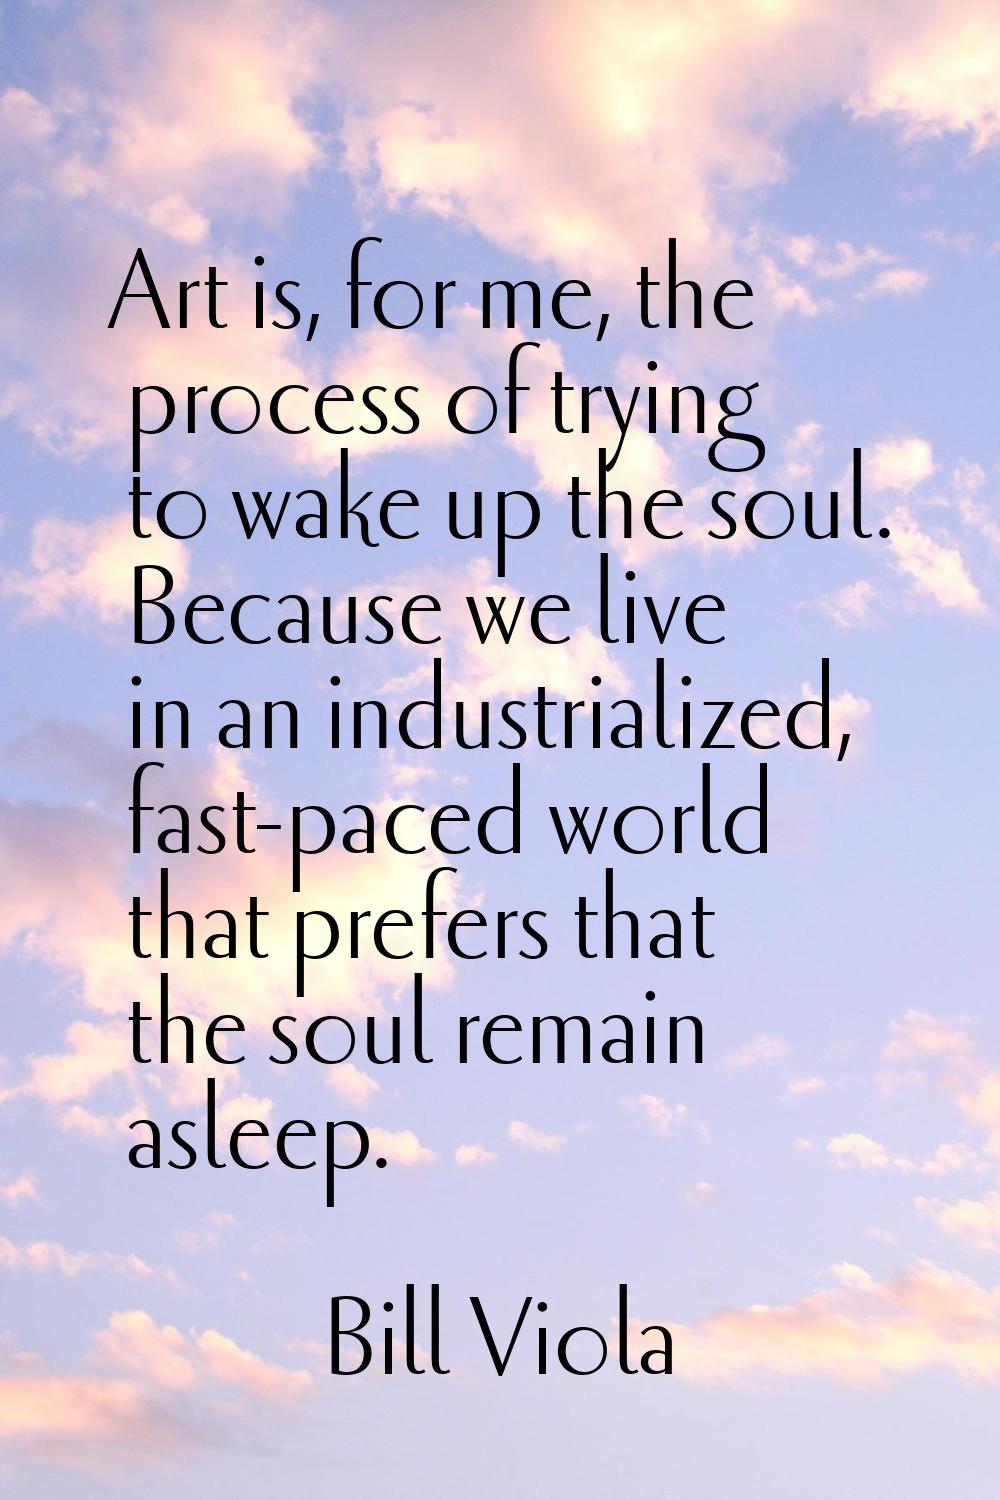 Art is, for me, the process of trying to wake up the soul. Because we live in an industrialized, fa